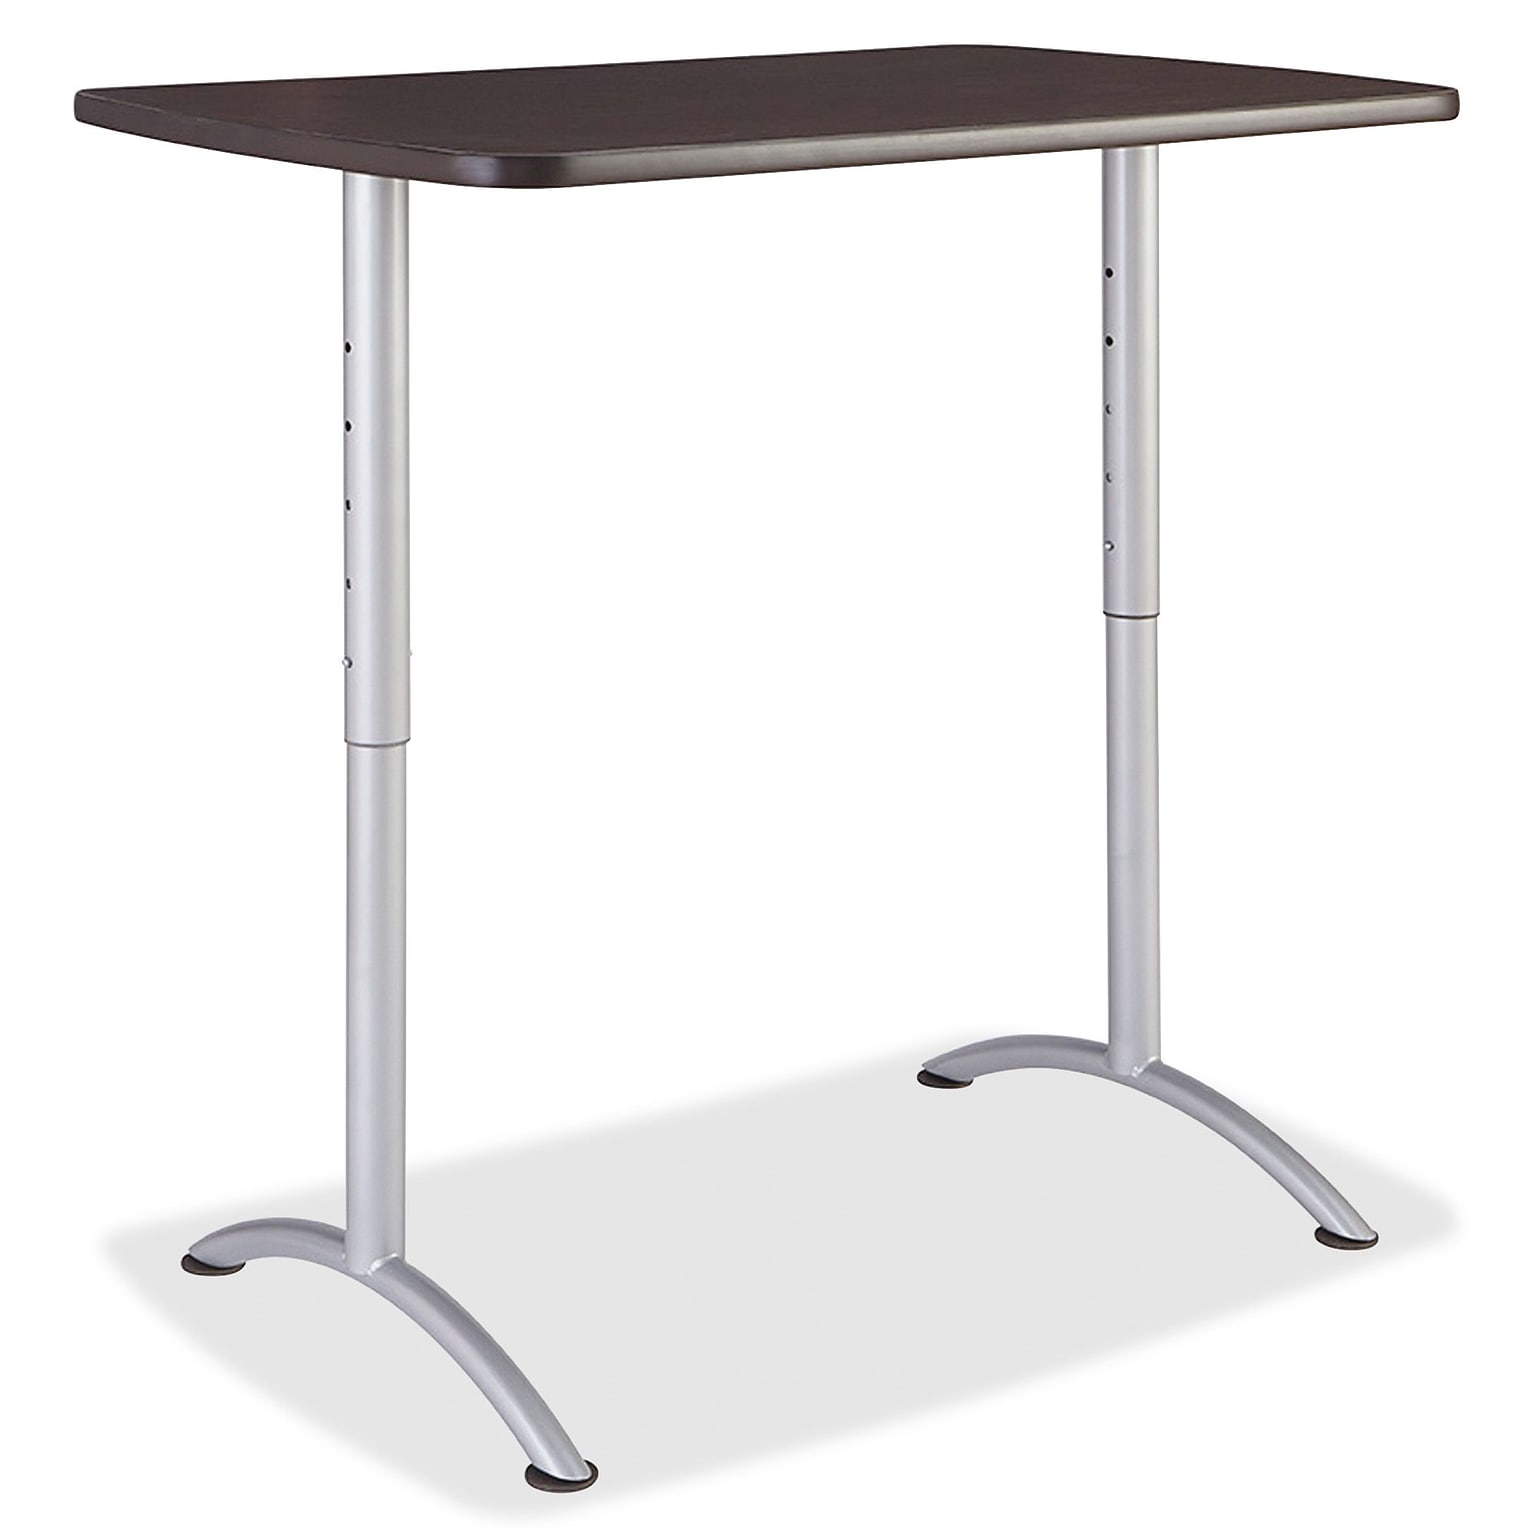 Iceberg Walnut Top Sit-to-Stand Table, Rectangle Top, Arch Base, 2 Legs, 48 Top L x 30 Top W x 1.13 Top Thickness, 42H, Gray